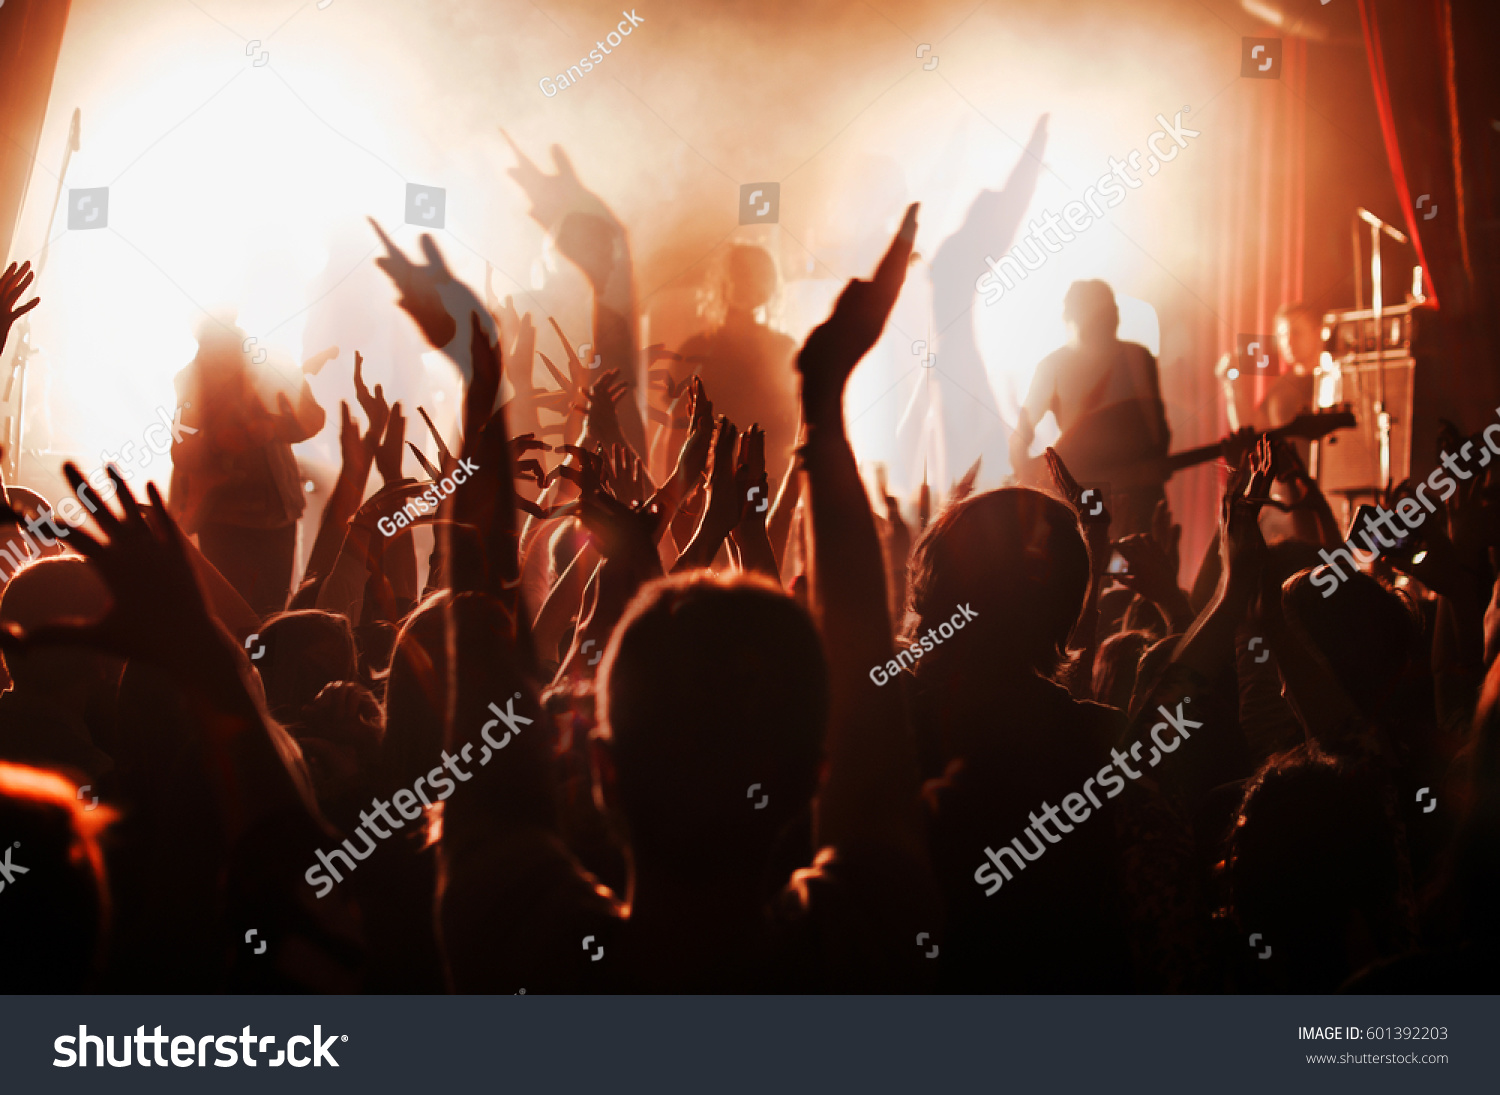 silhouettes of people at a rock festival concert in front of the scene in bright light. Double exposure #601392203